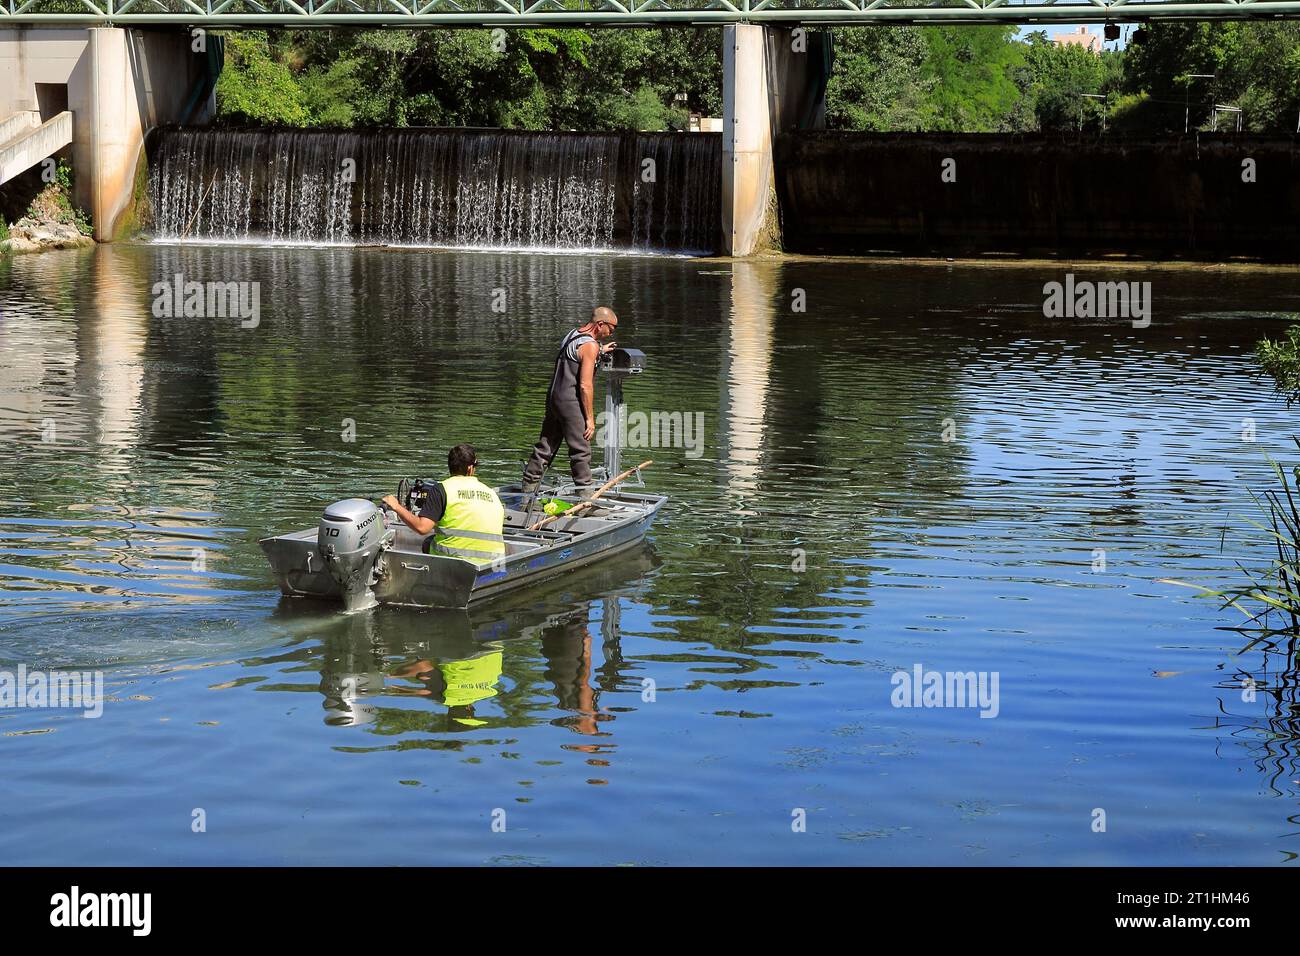 Removing algae with a machine in the Lez River. Philip Brothers Company. Montpellier, Occitanie, France Stock Photo